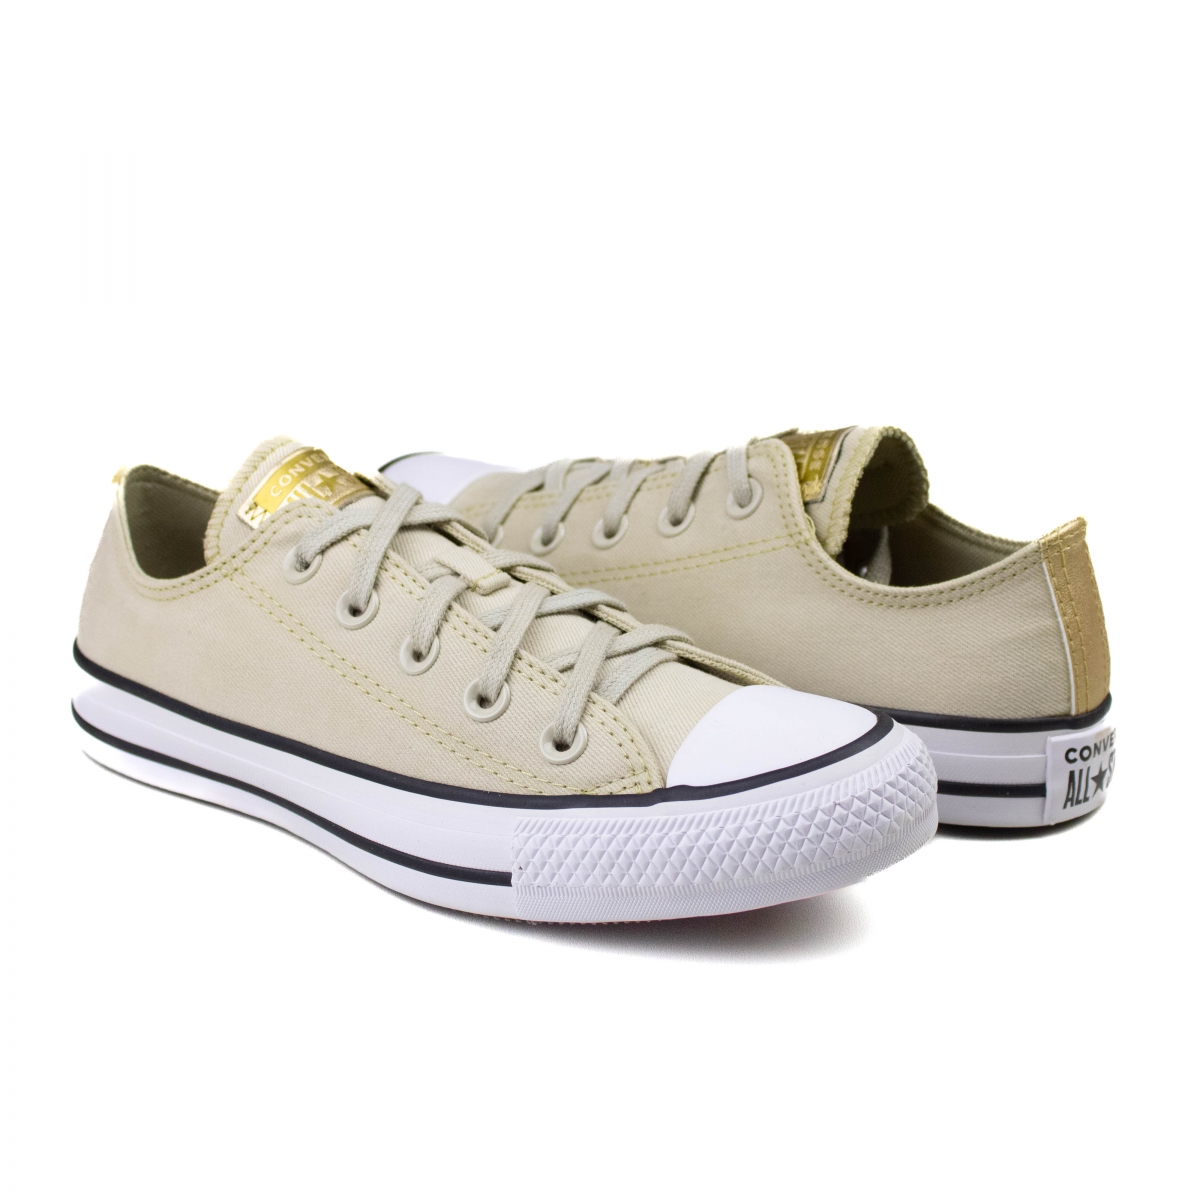 Tênis All Star Converse Chuck Taylor - Bege/ouro/branco